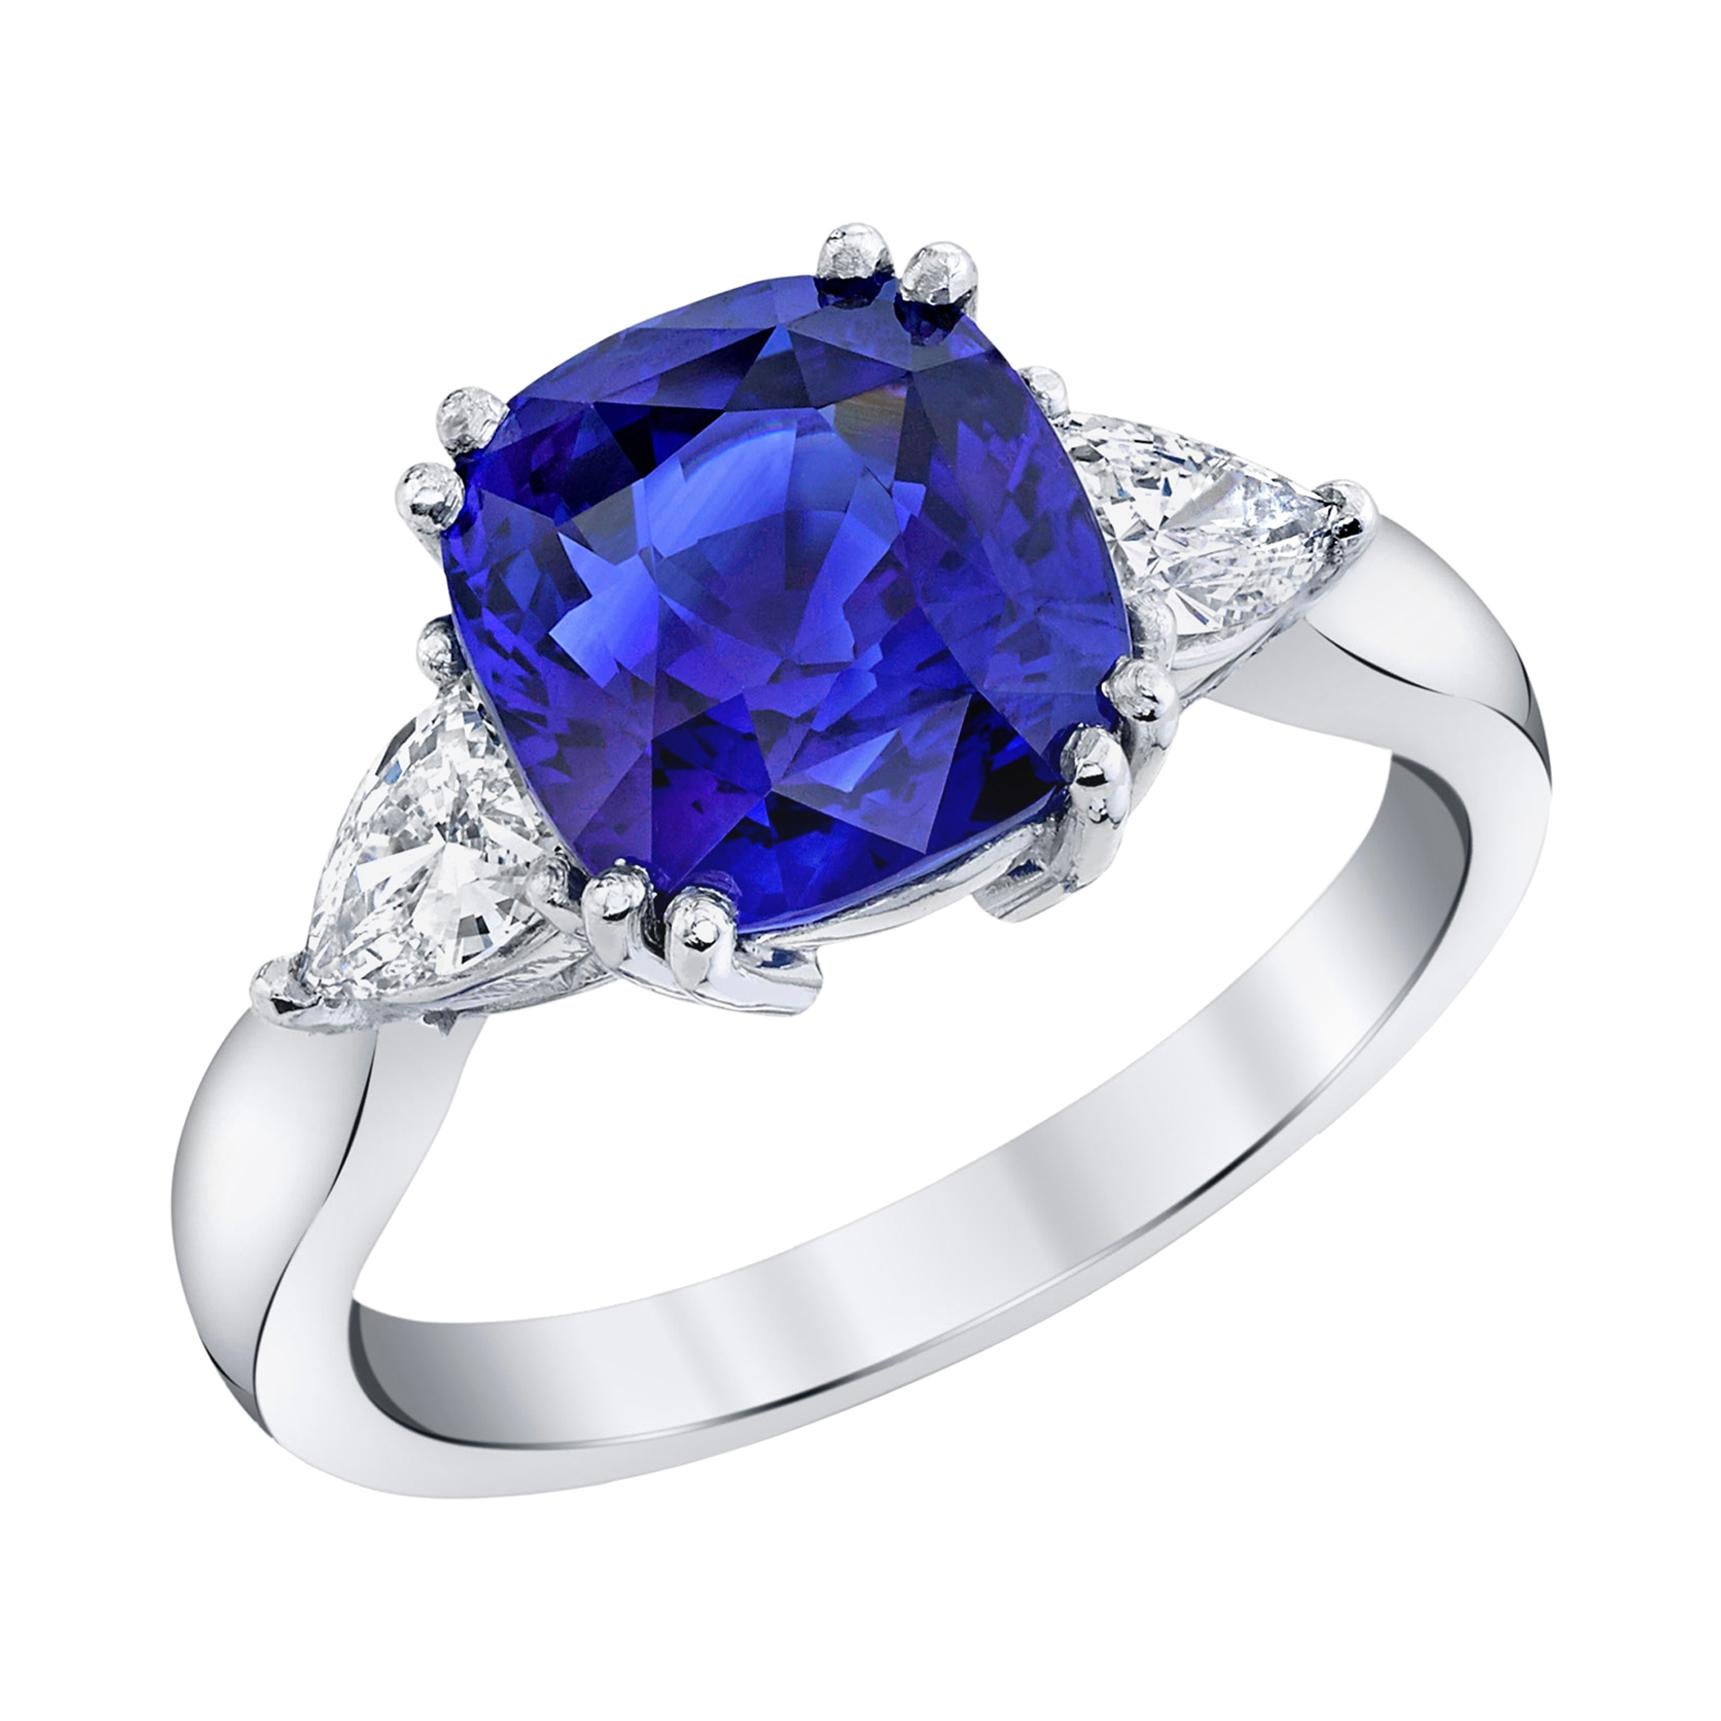 GIA Certified 4.53 Carat Blue Sapphire and Diamond Engagement Ring in Platinum 